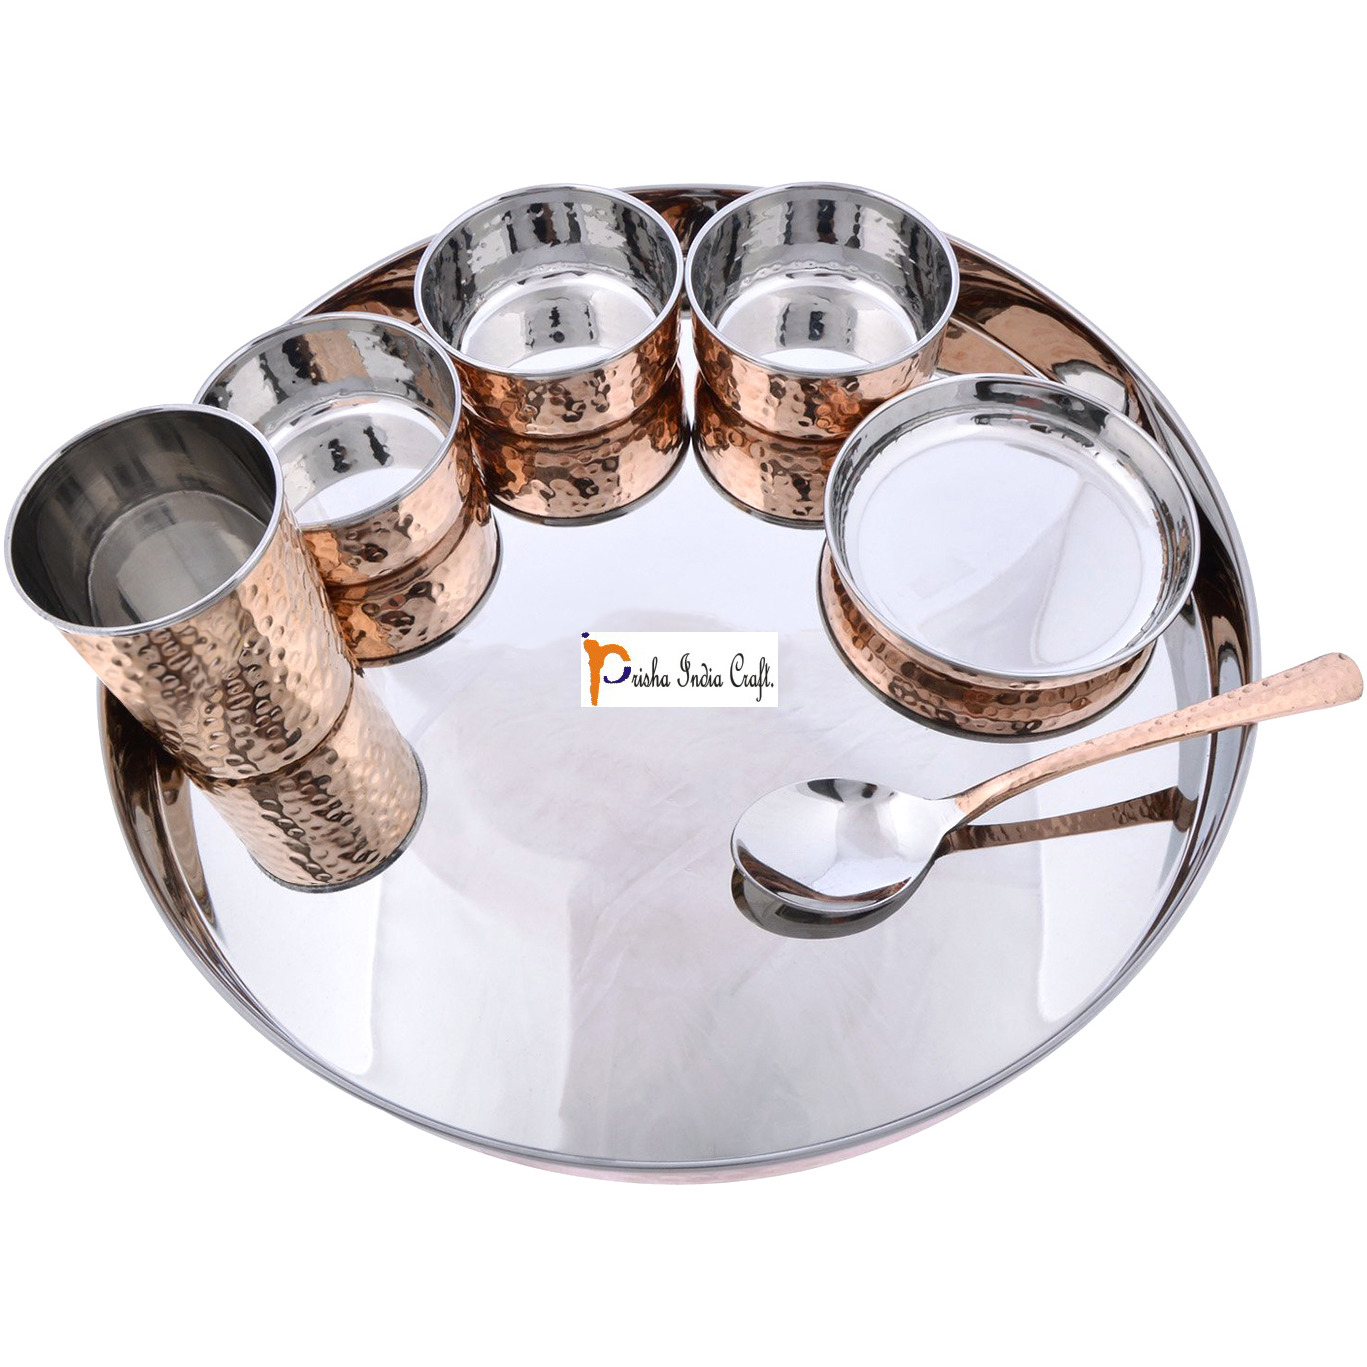 Prisha India Craft B. Set of 4 Dinnerware Traditional Stainless Steel Copper Dinner Set of Thali Plate, Bowls, Glass and Spoon, Dia 13  With 1 Luxury Style Stainless Steel Copper Pitcher Jug - Christmas Gift